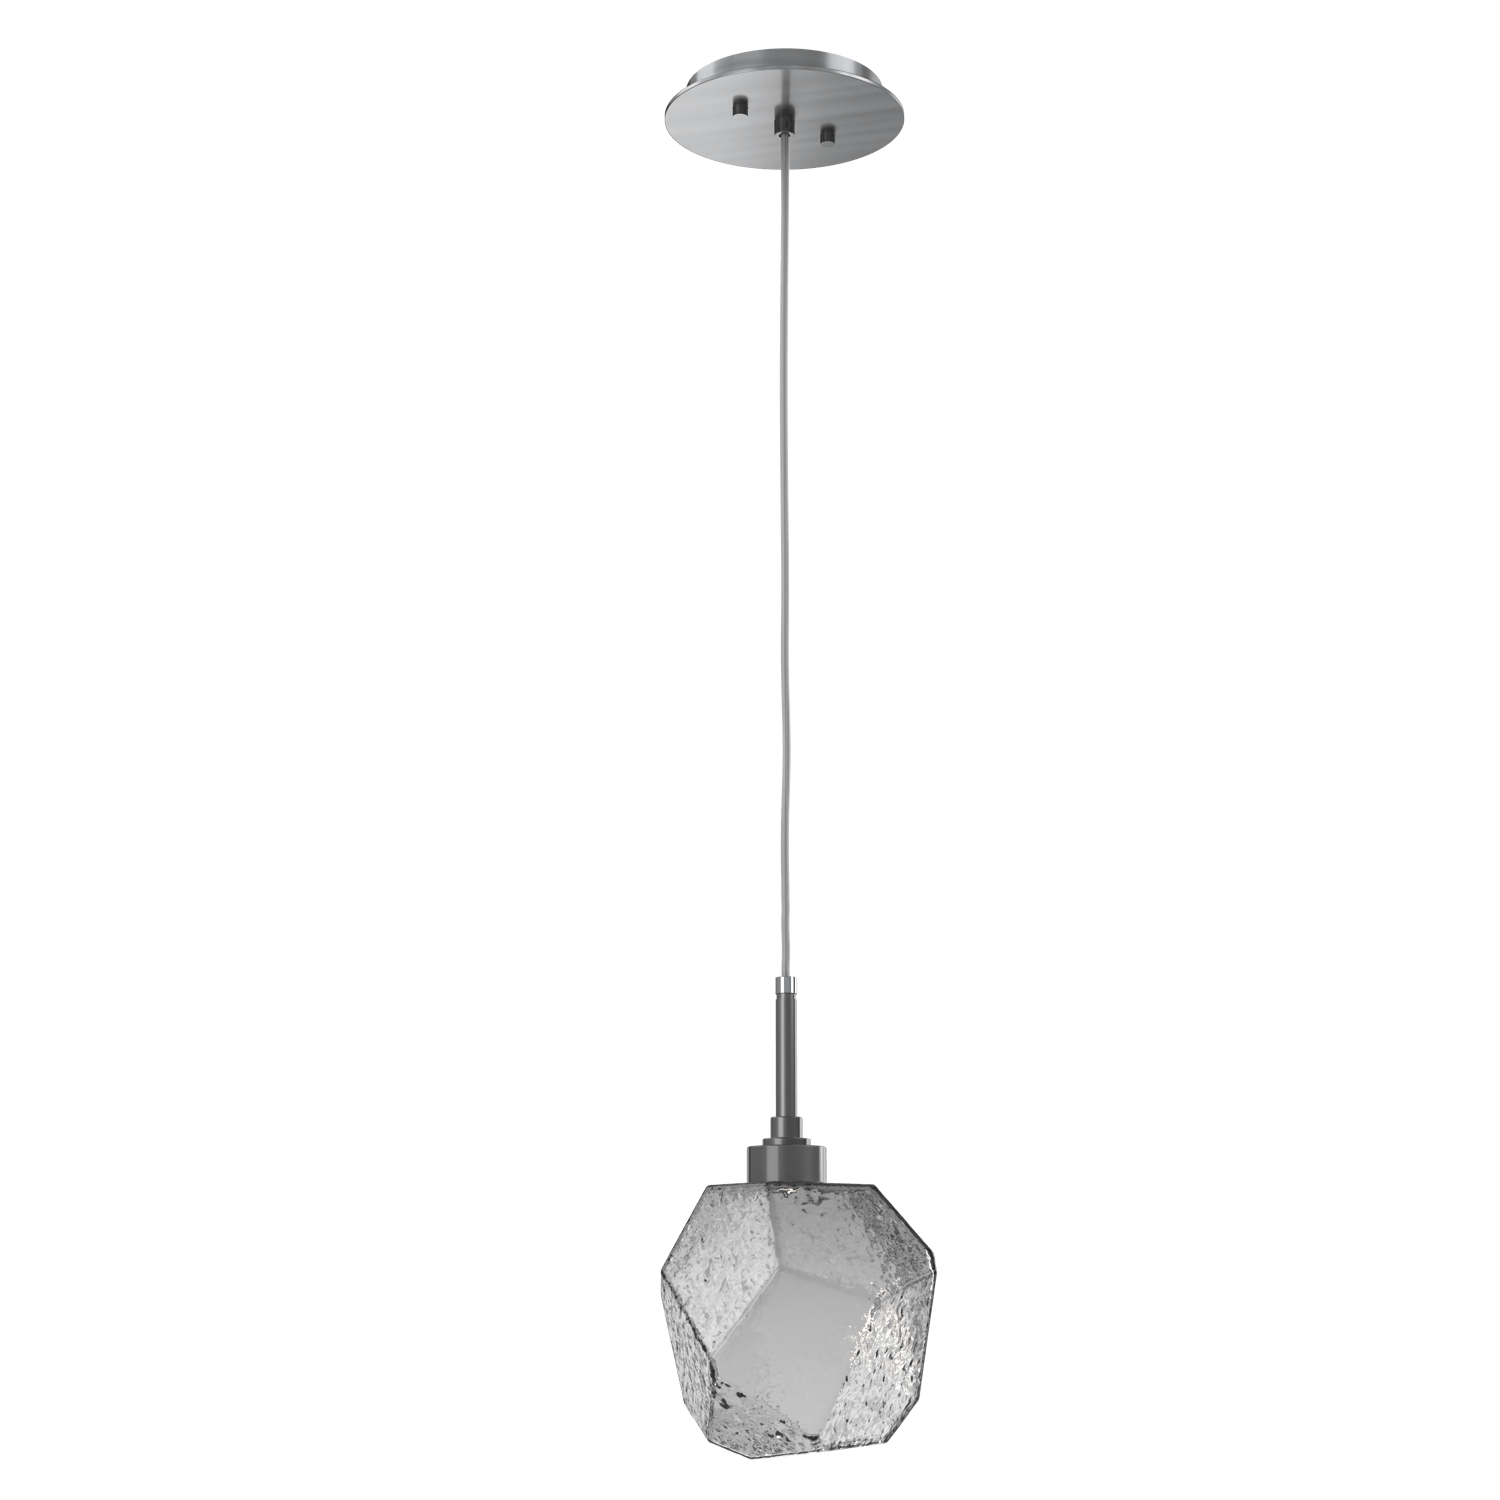 LAB0039-01-GM-S-Hammerton-Studio-Gem-pendant-light-with-gunmetal-finish-and-smoke-blown-glass-shades-and-LED-lamping